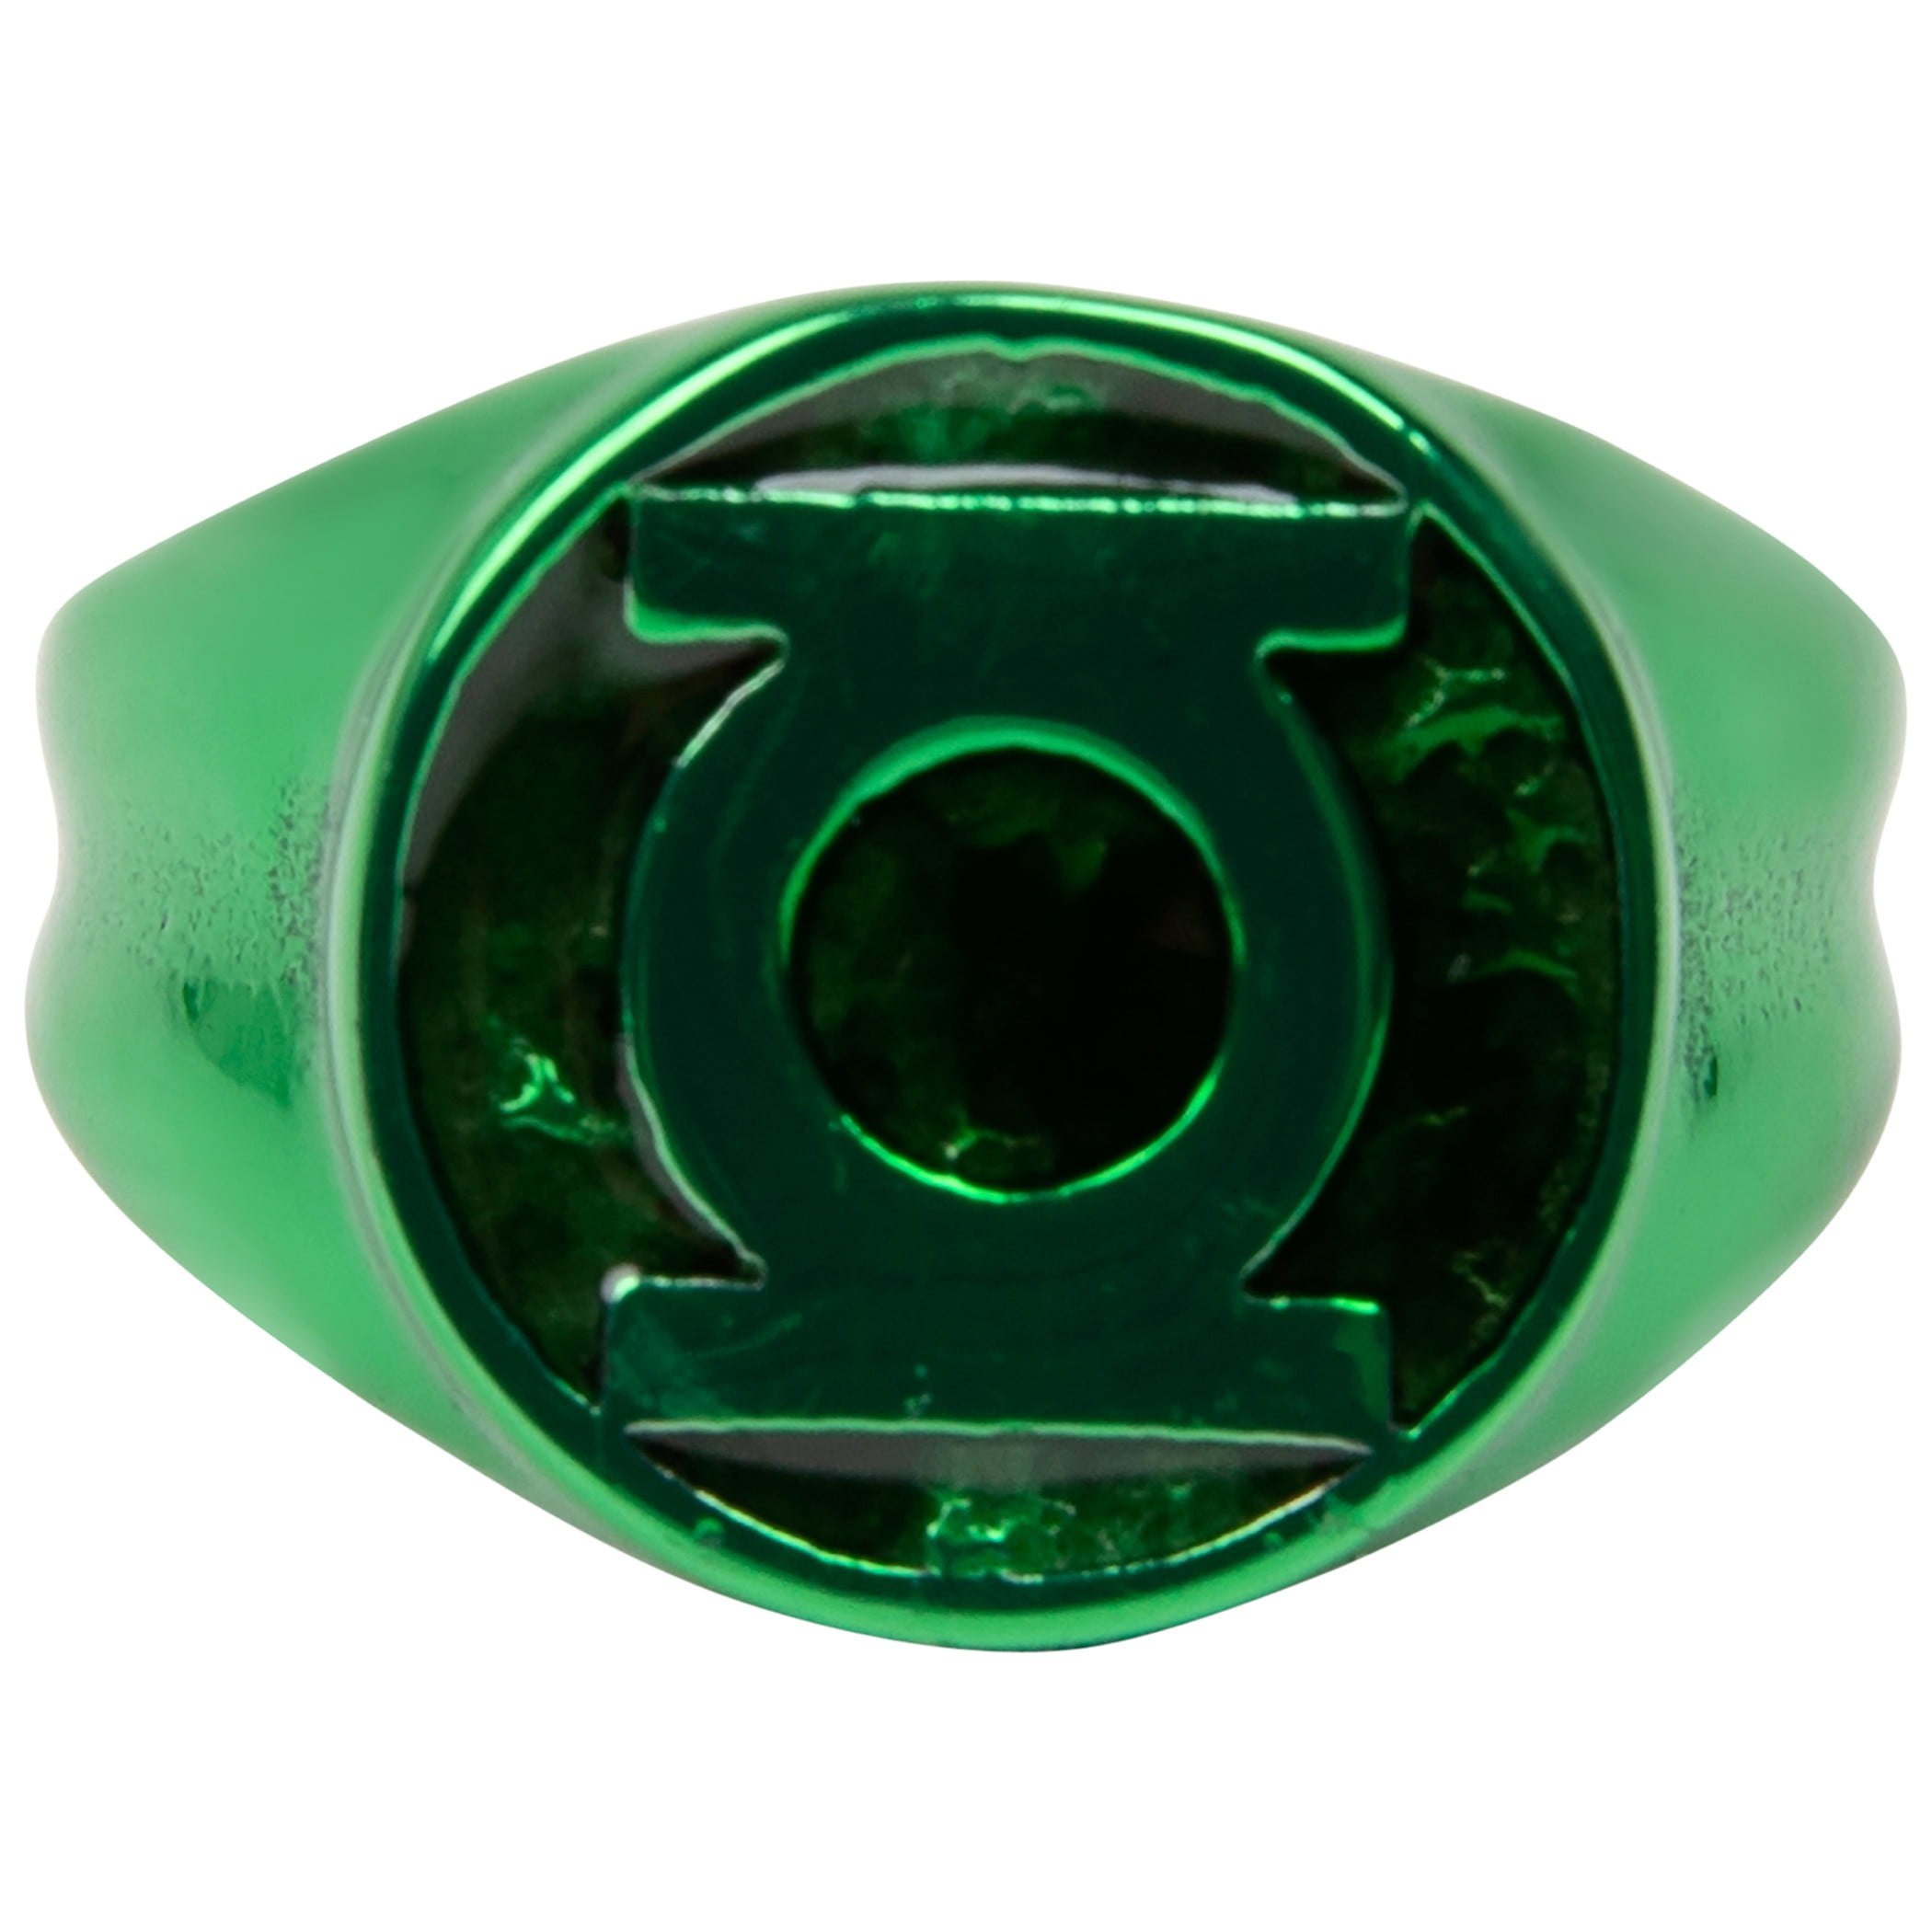 Making a Green Lantern Power Ring out of Solid Meteorite (Pt. 2) - YouTube